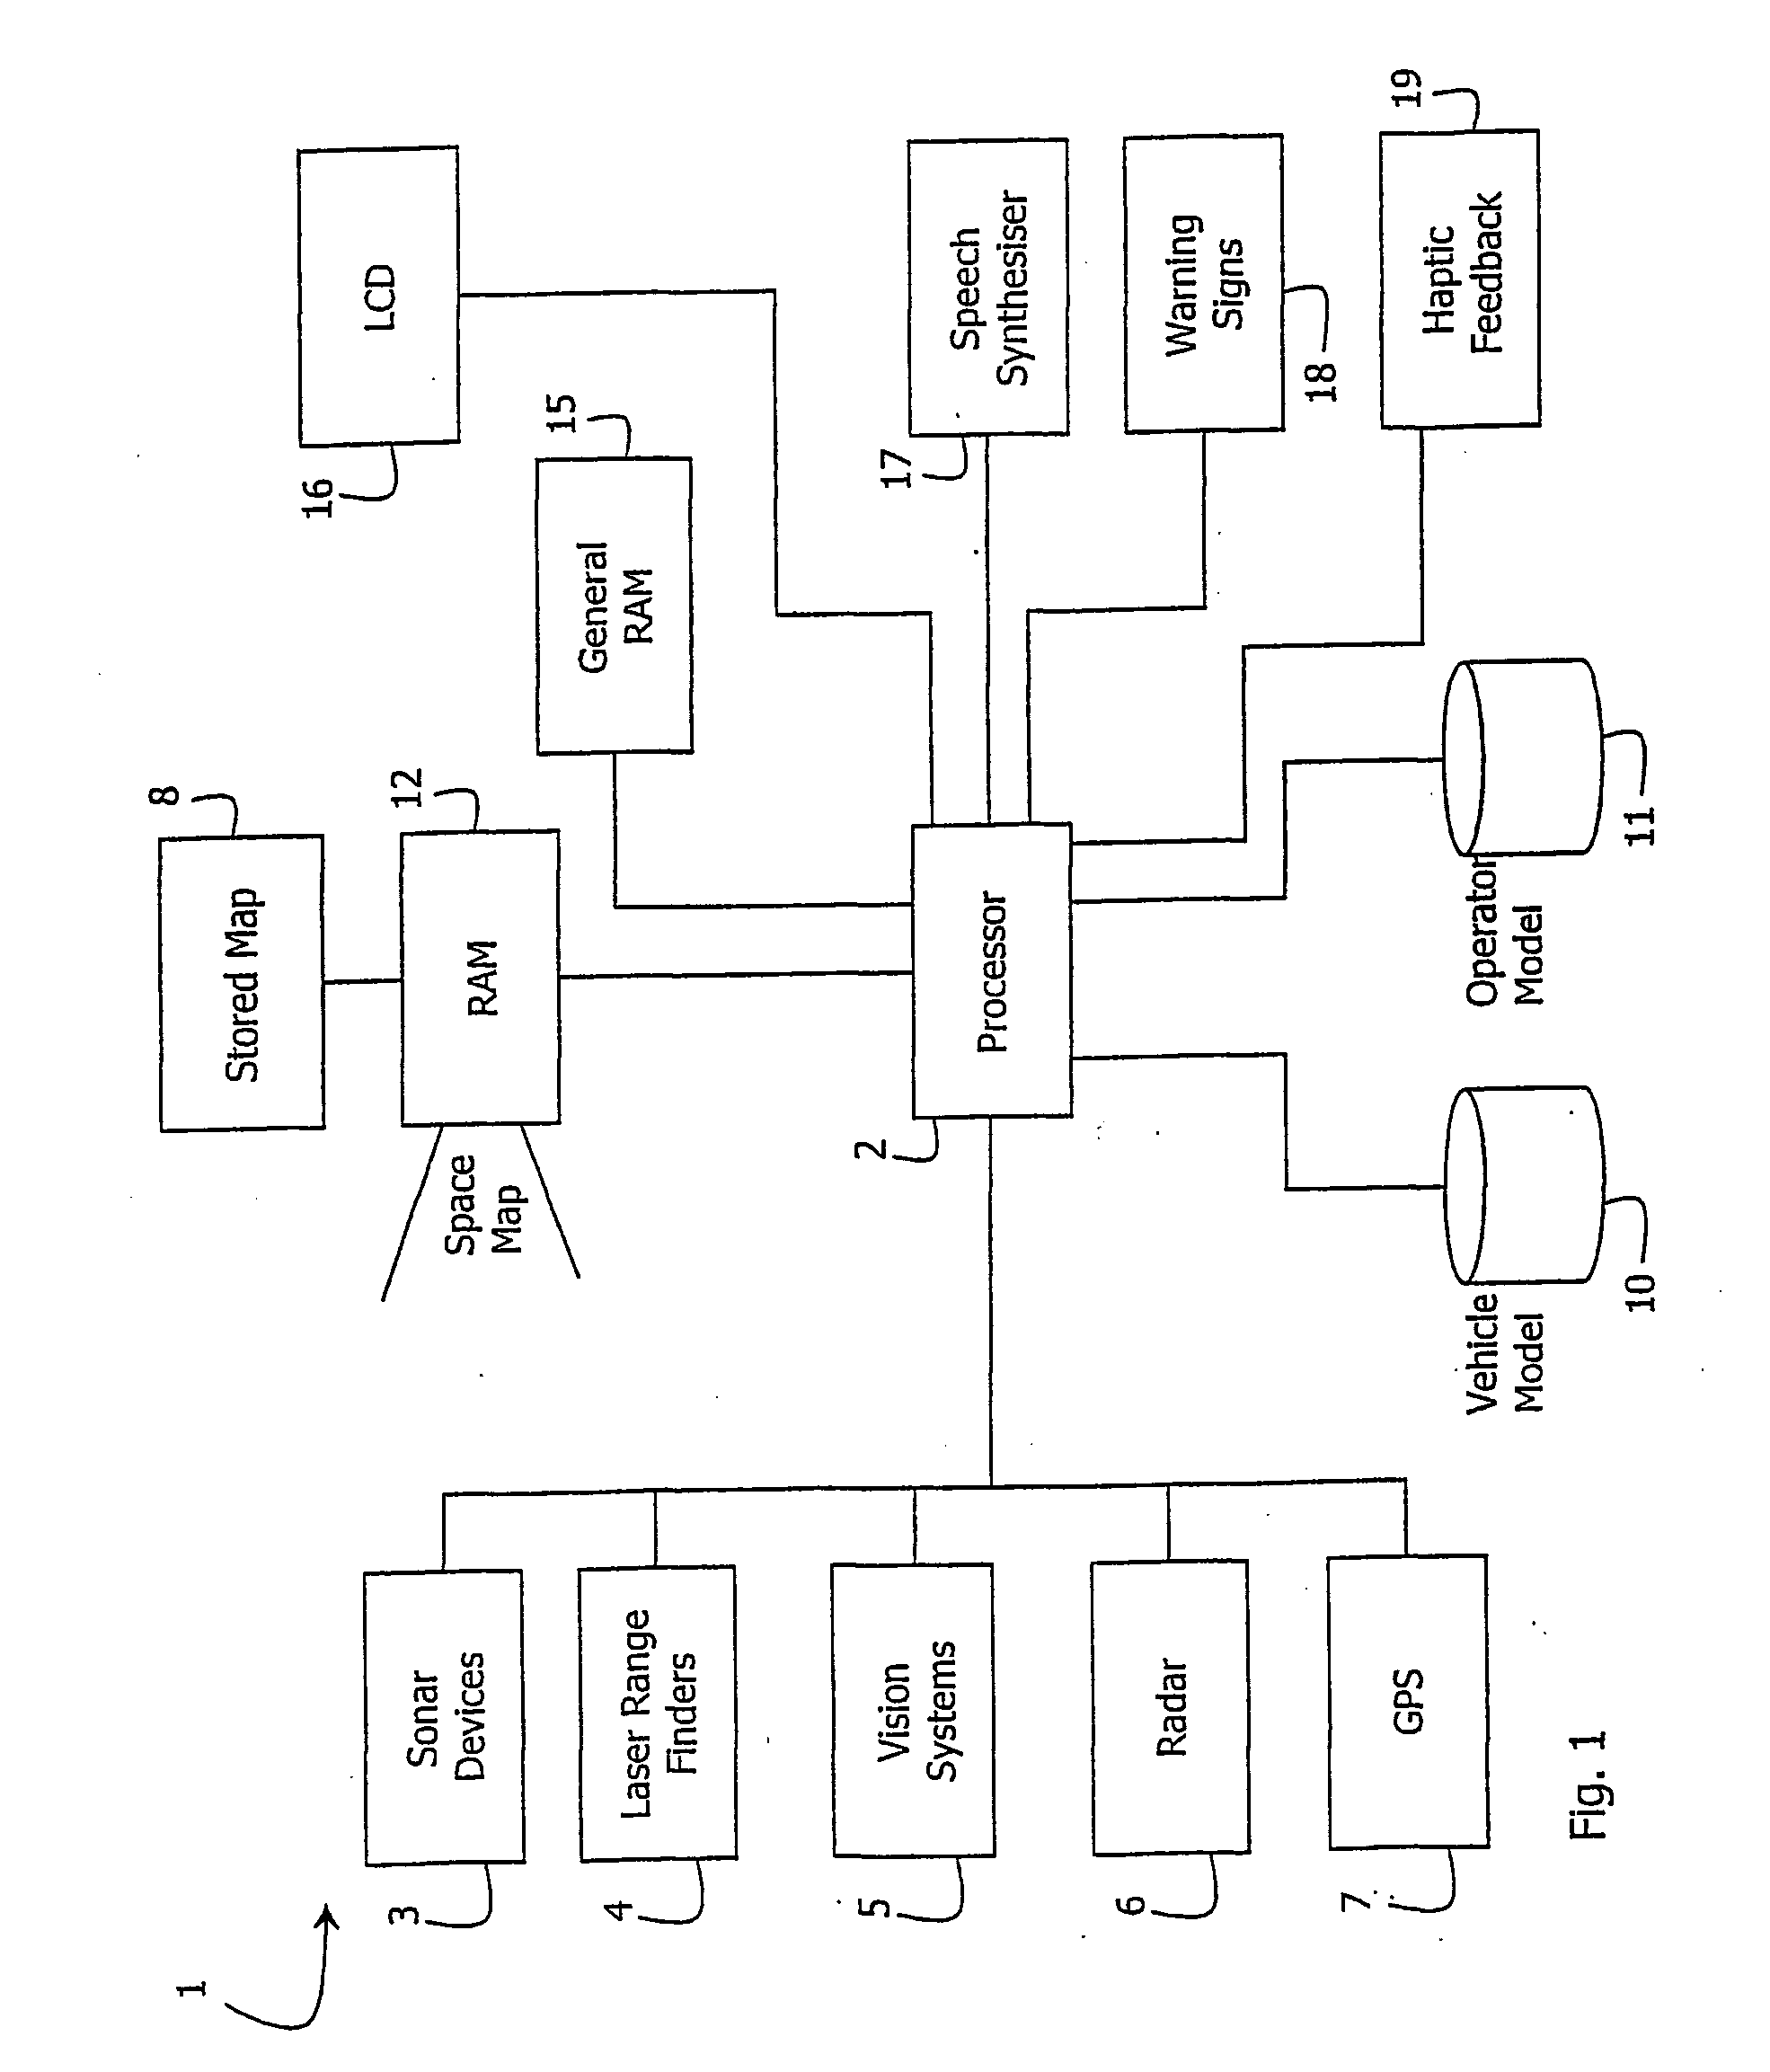 Method and system for guiding a vehicle